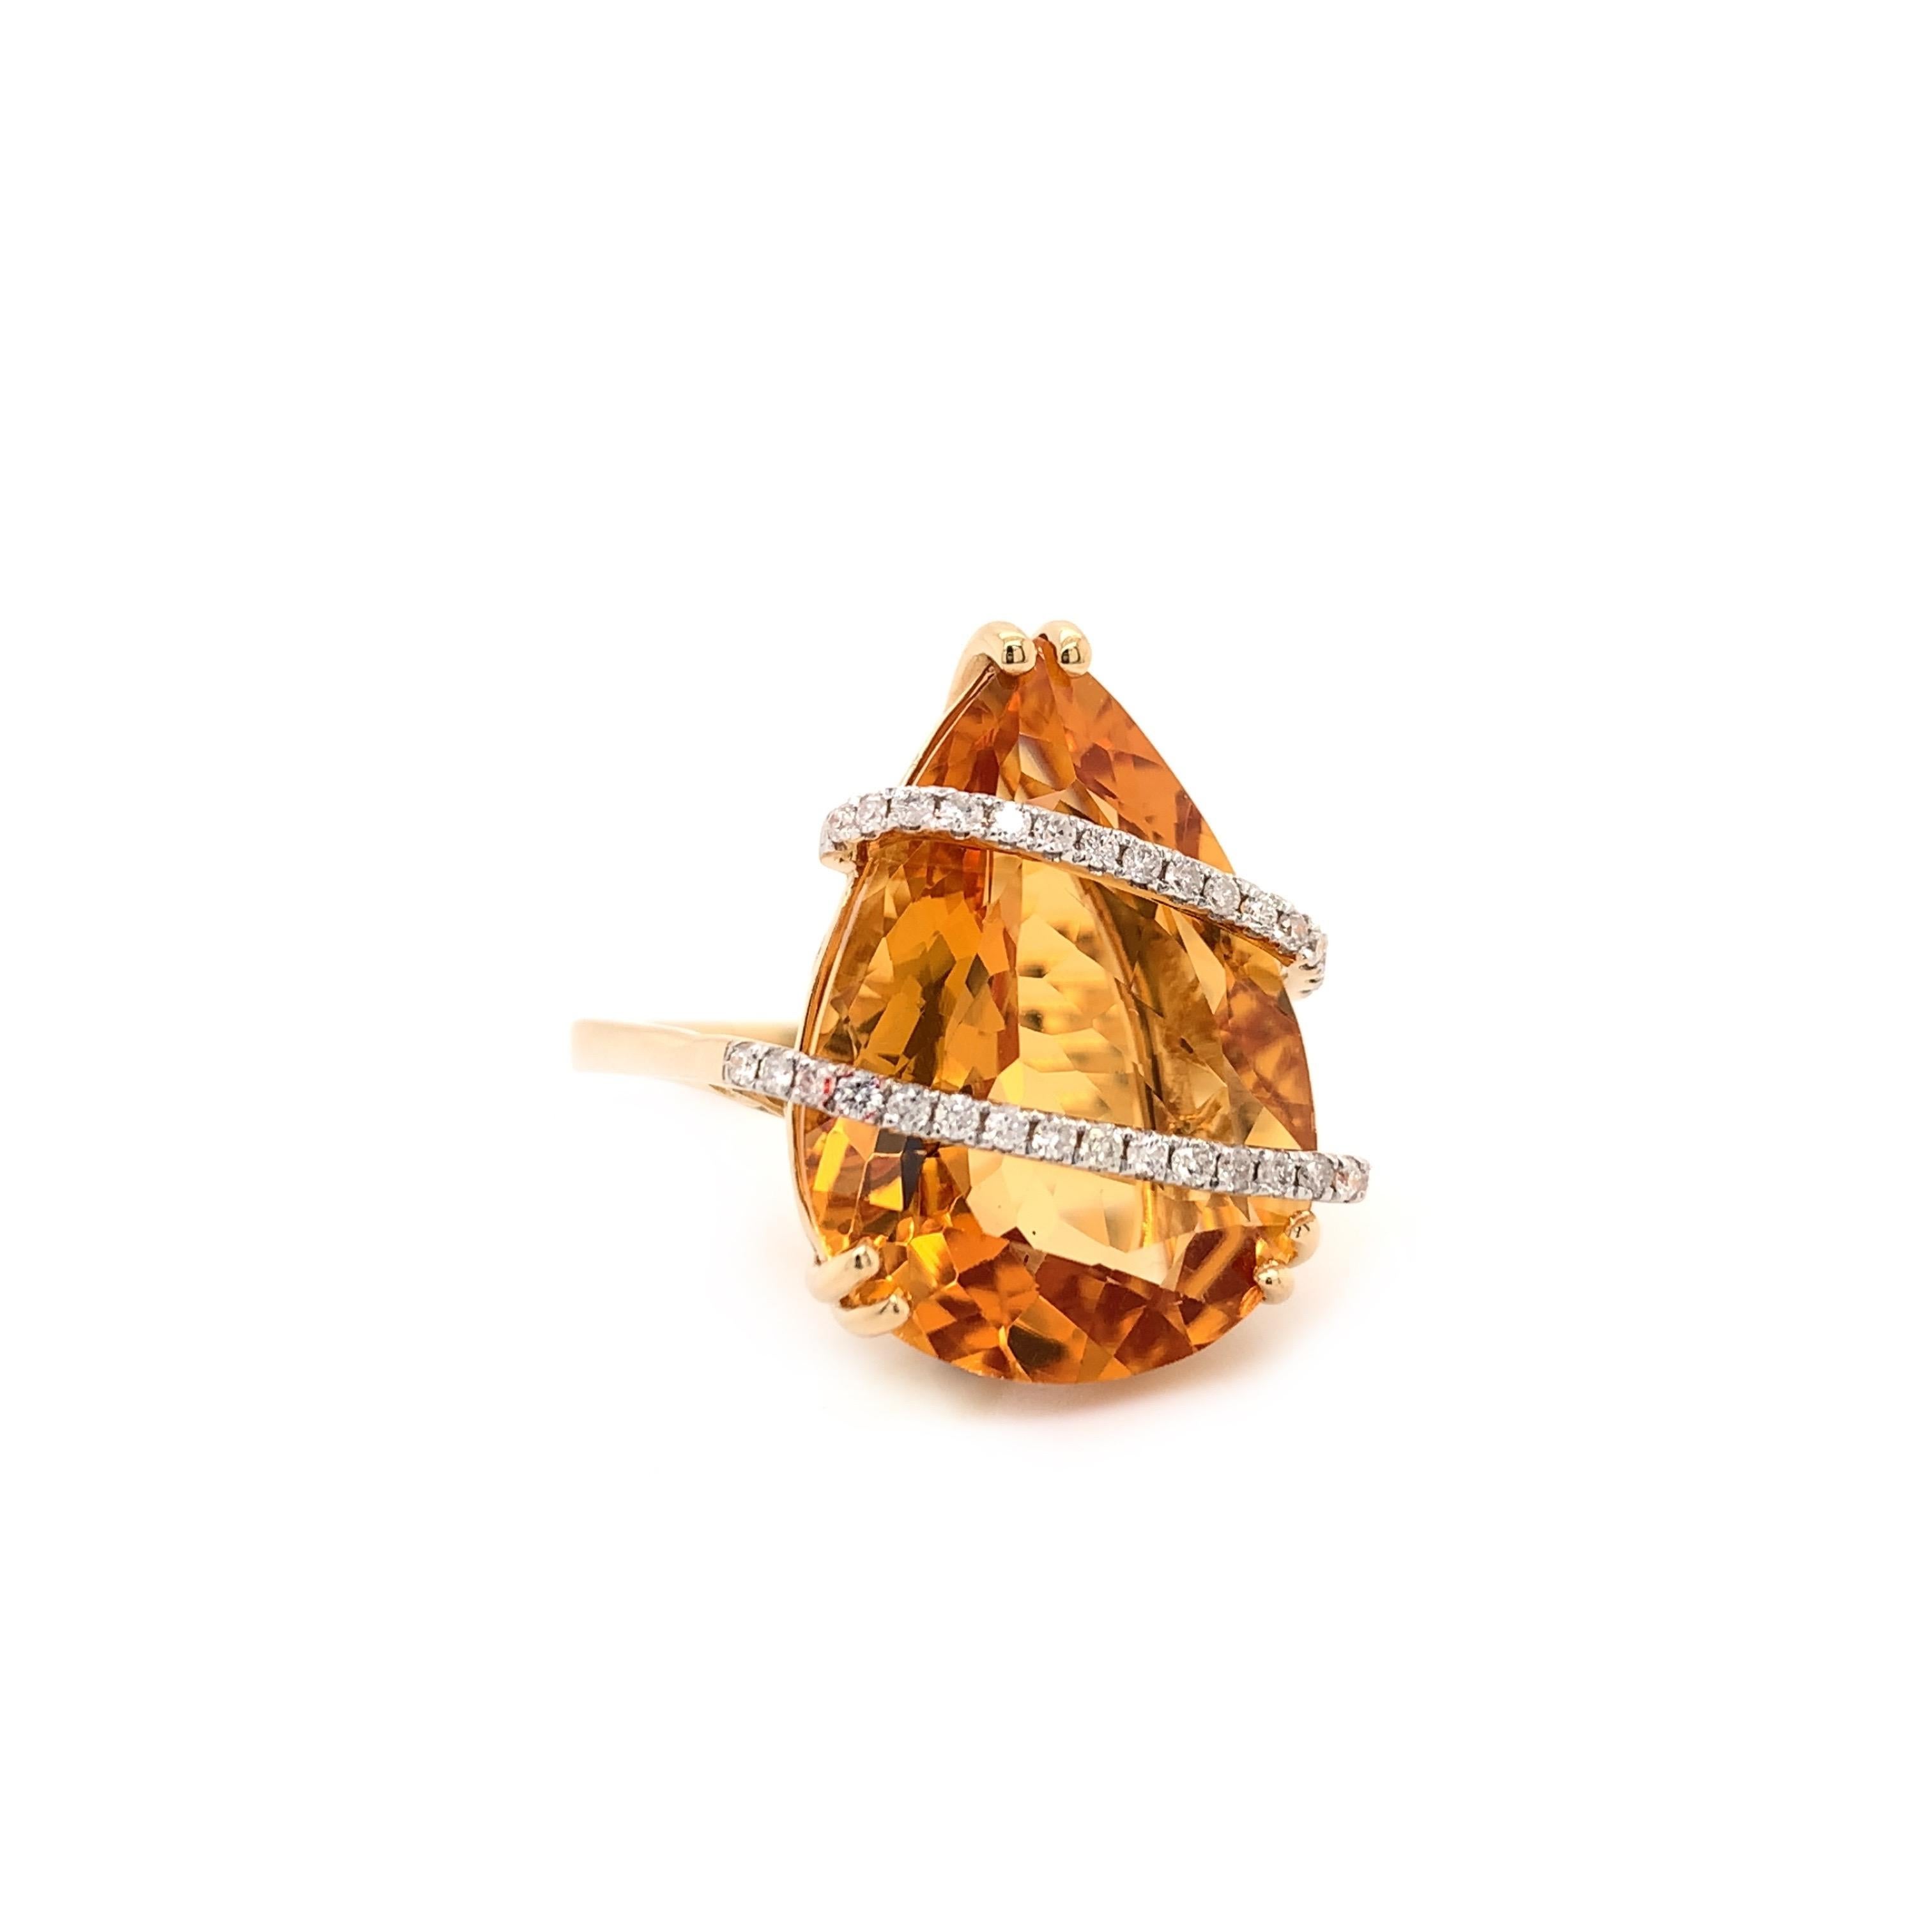  Stunning citrine cocktail ring. High brilliance, transparent, rich golden honey tone, pear shape faceted natural 11.70 carats citrine mounted in high profile open basket with 6 bead prongs, accented with 2 rows of round brilliant cut diamonds.